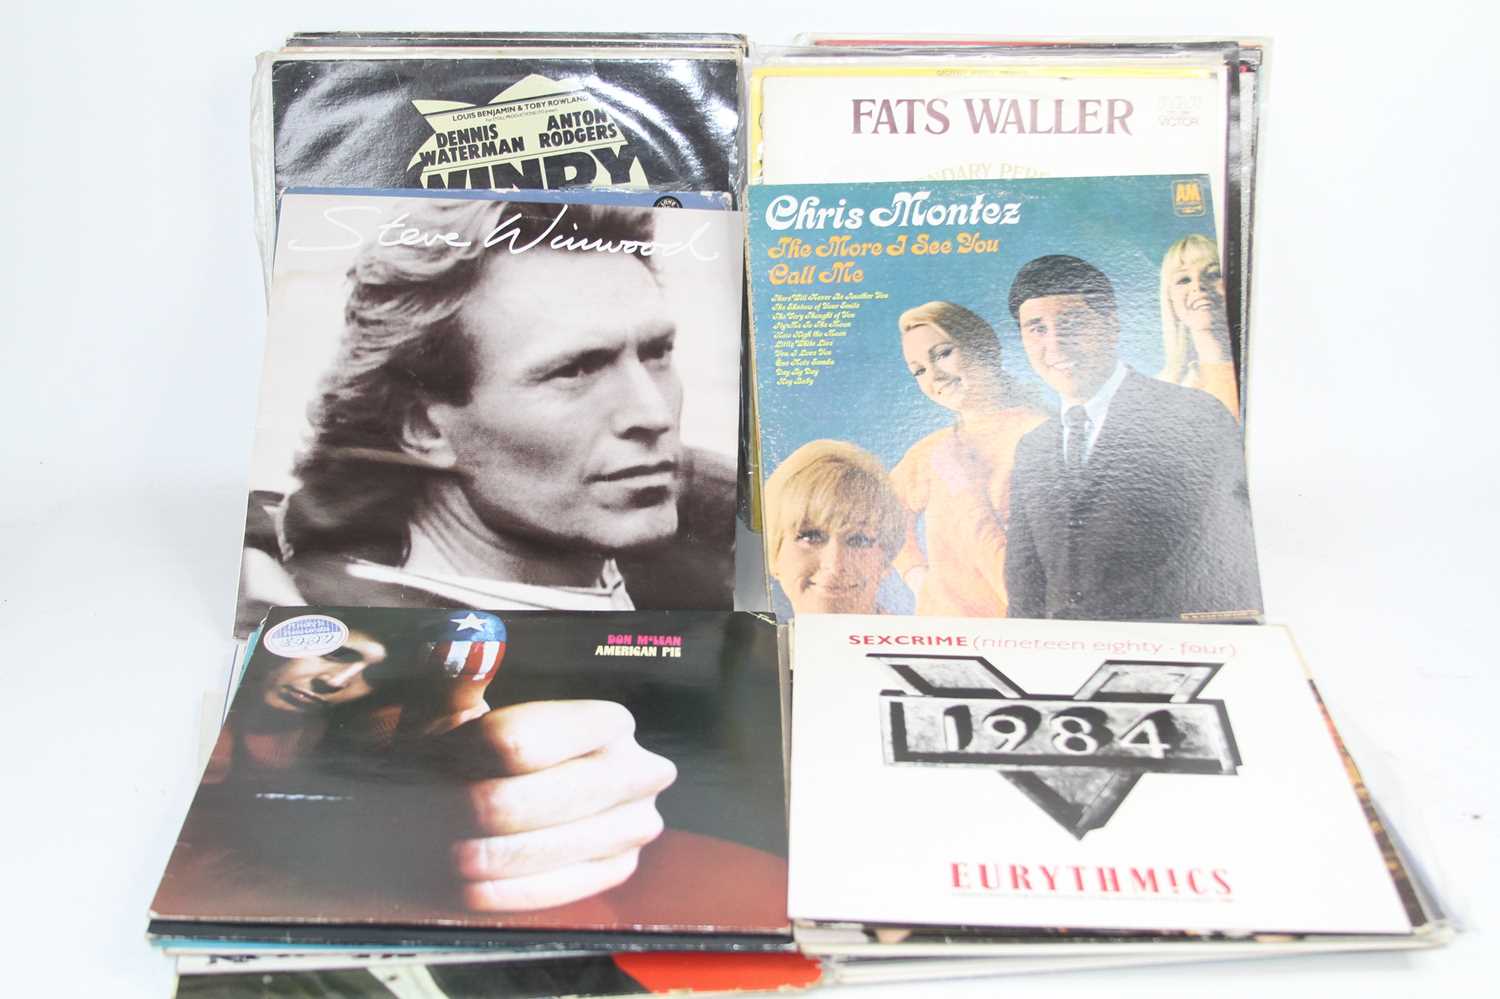 A collection of vintage LPs, to include The Secret Policeman's Ball and David Essex